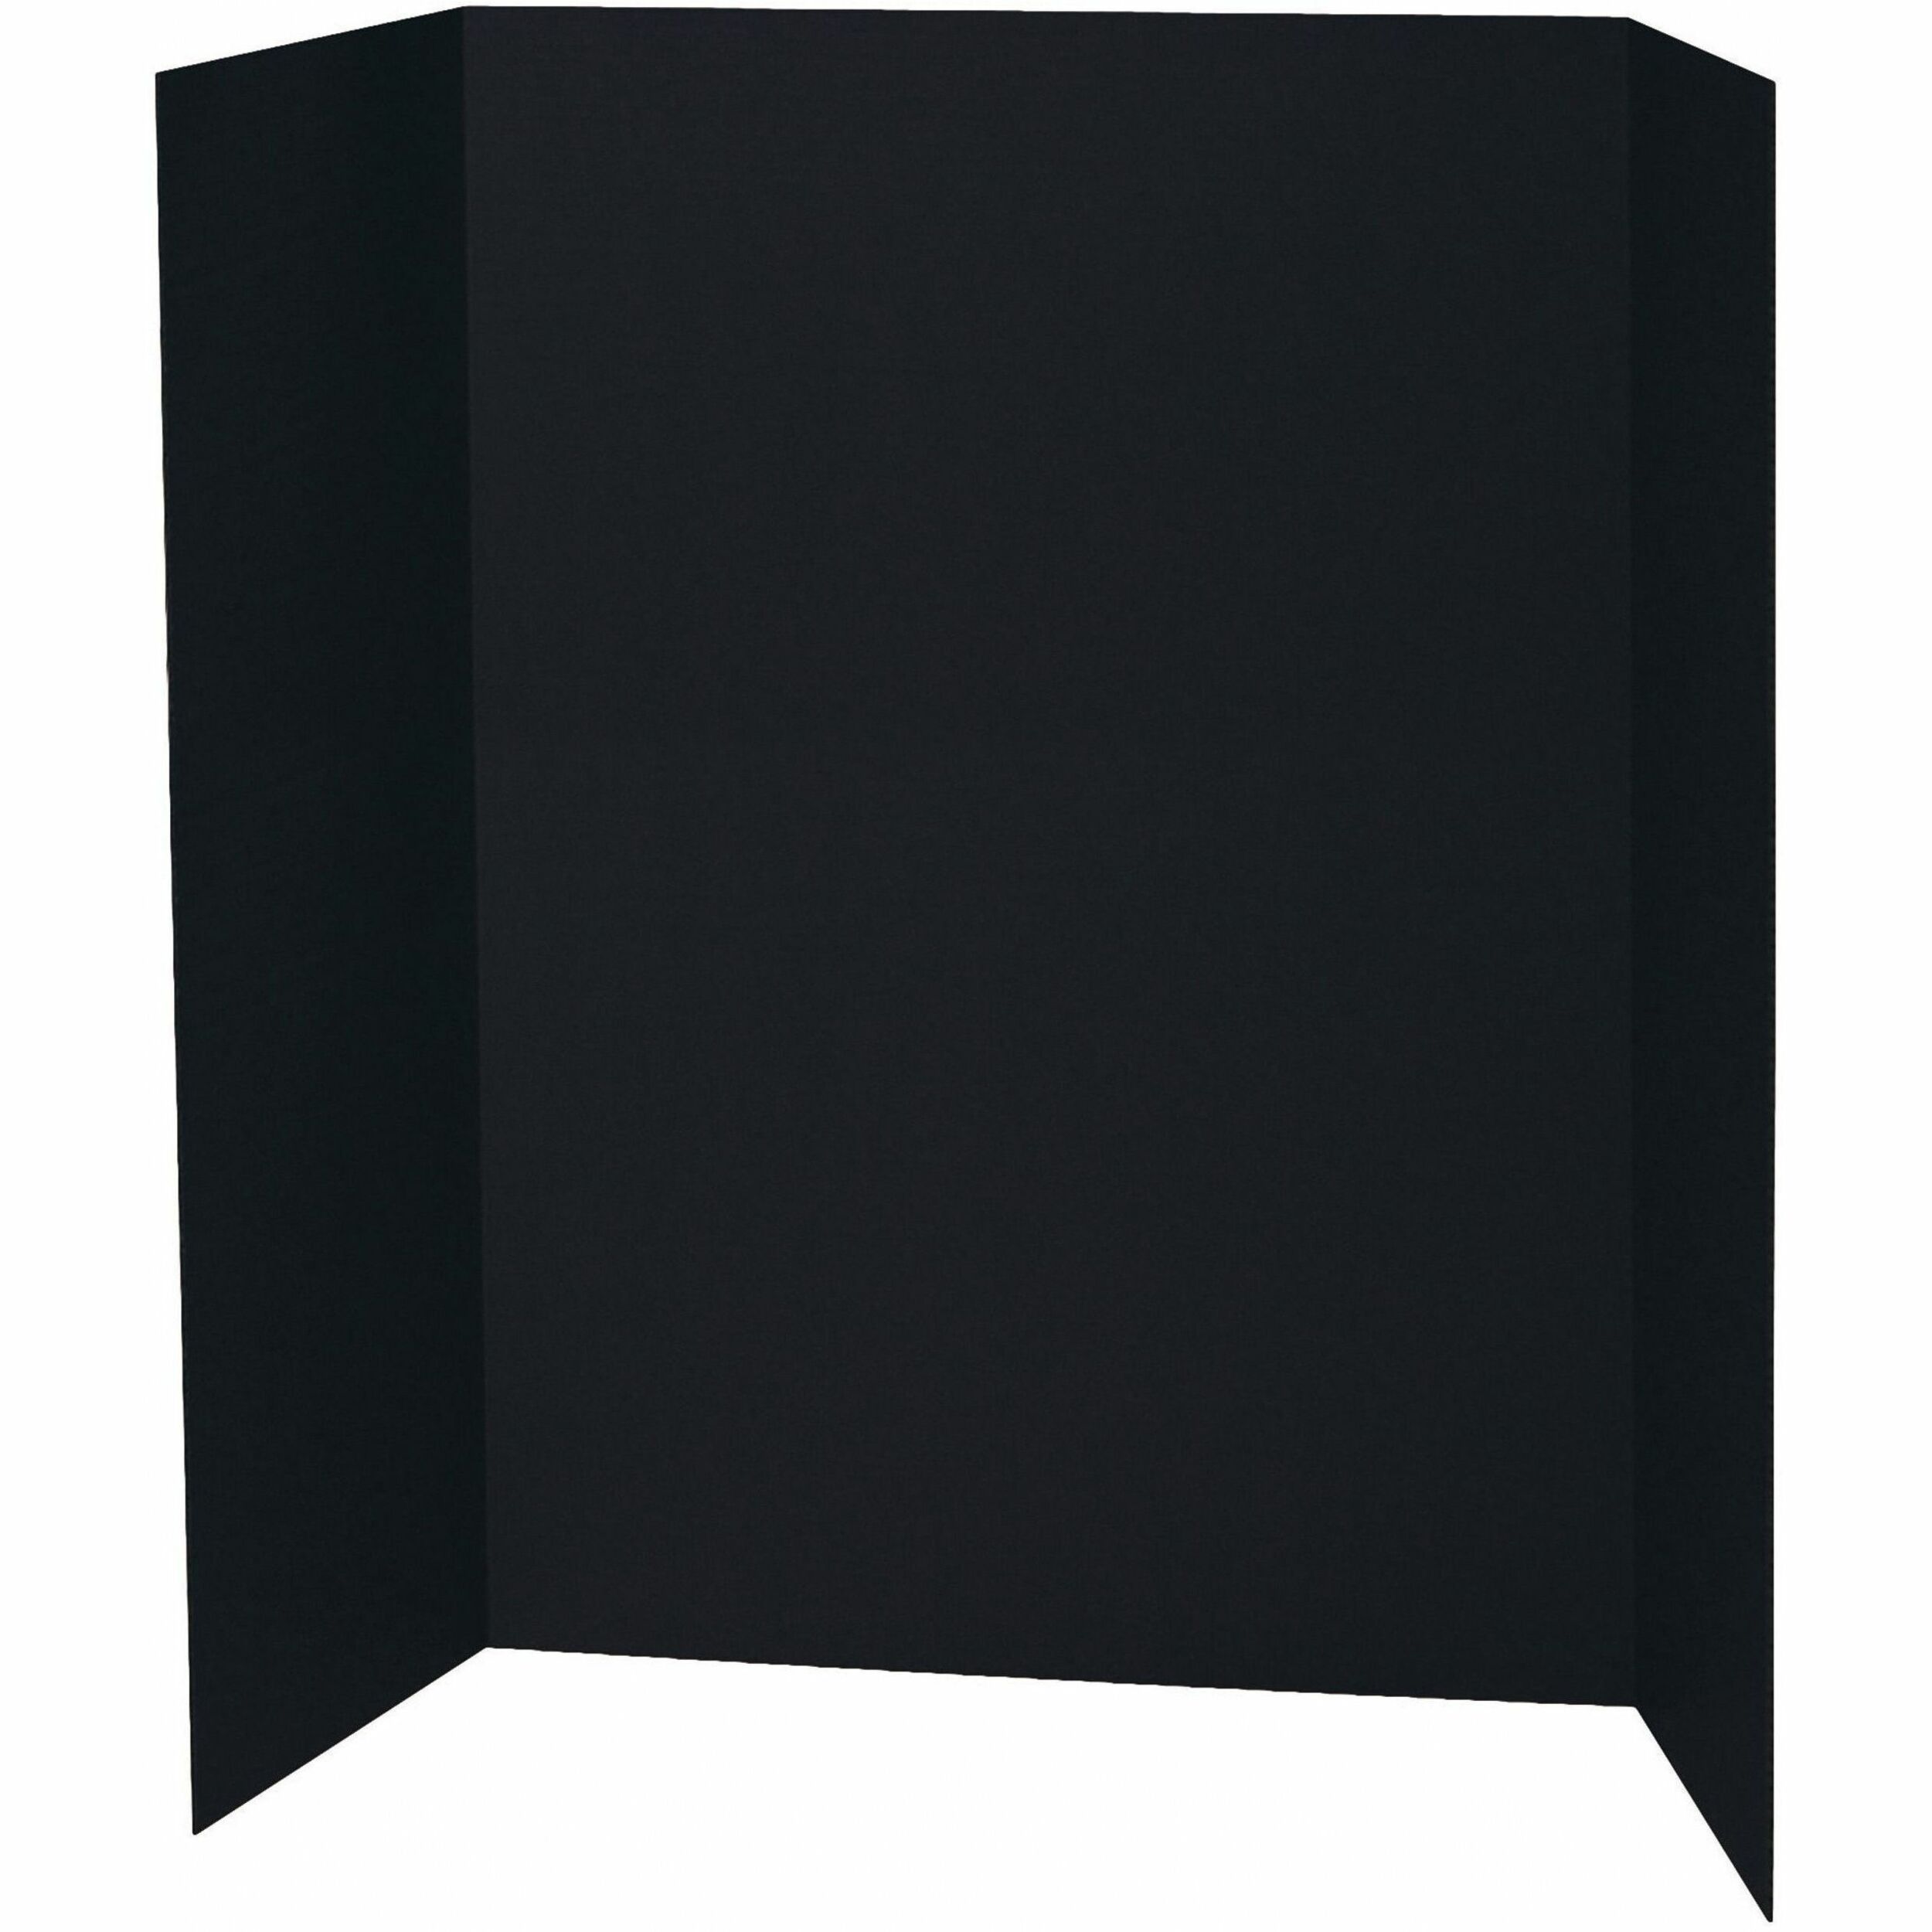  Pacon Presentation Board, Single Wall, 48 x 36, Black, 24  Boards : Office Products